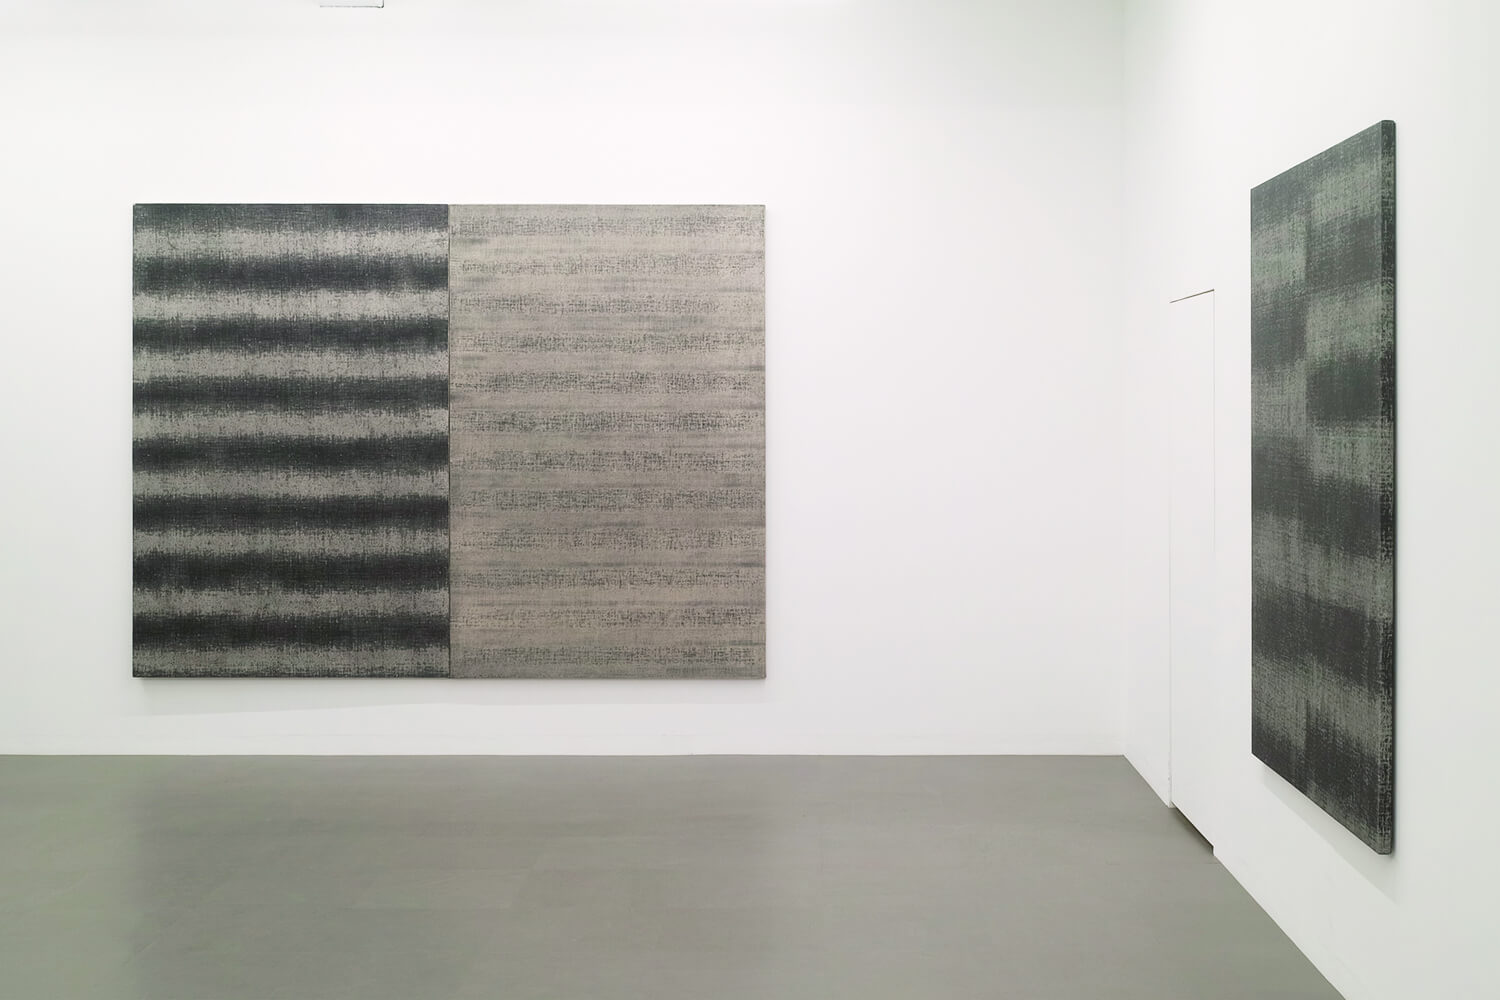 Drawing by drawing, Oil on canvas, 194 x 130 cm each (set of 2), 1979 (left)<br>Drawing by drawing, Oil on canvas, 194 x 130 cm, 1982 (right)